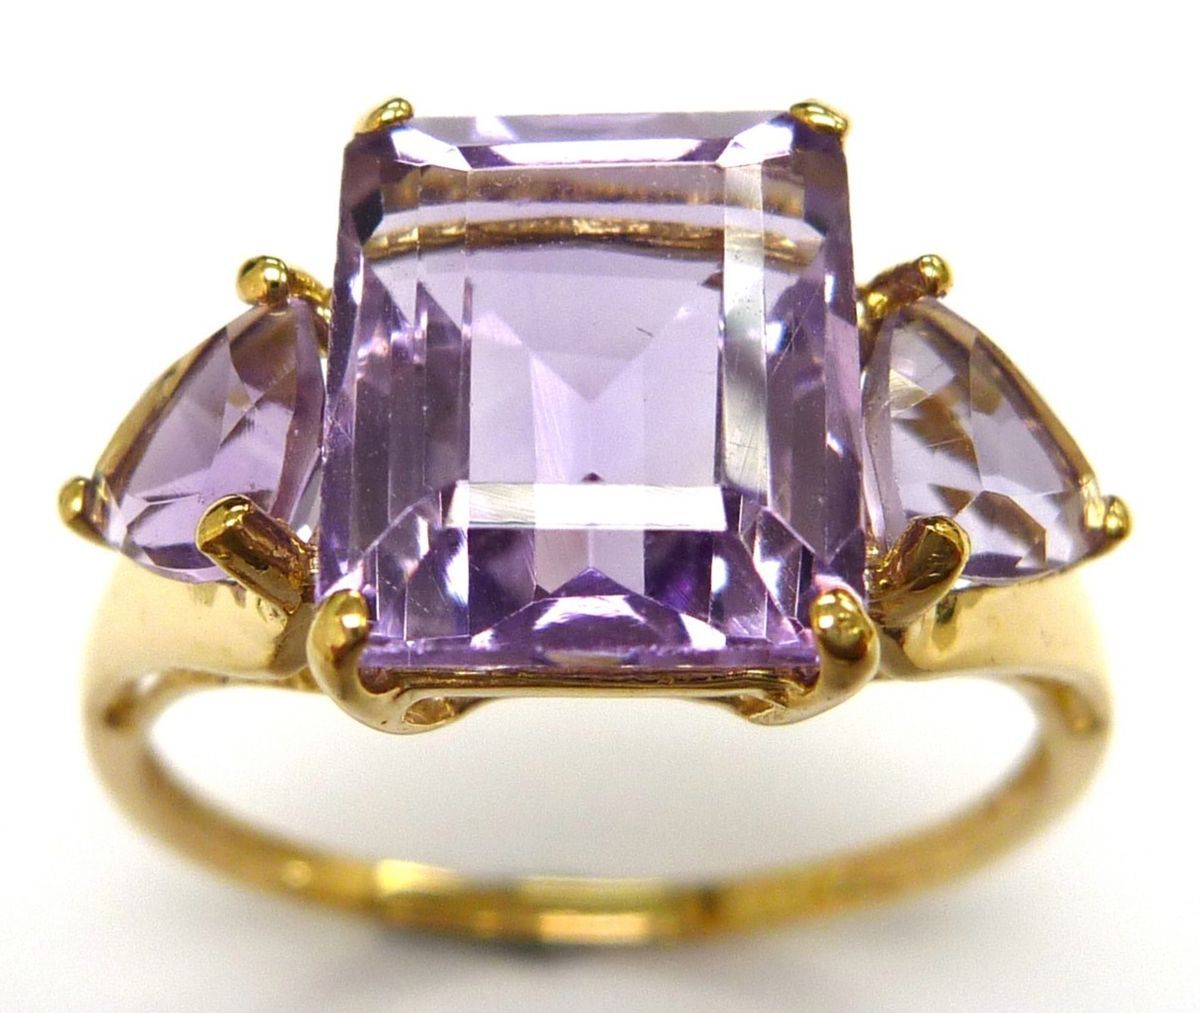  4 50ctw Amethyst Ring Solid Yellow Gold